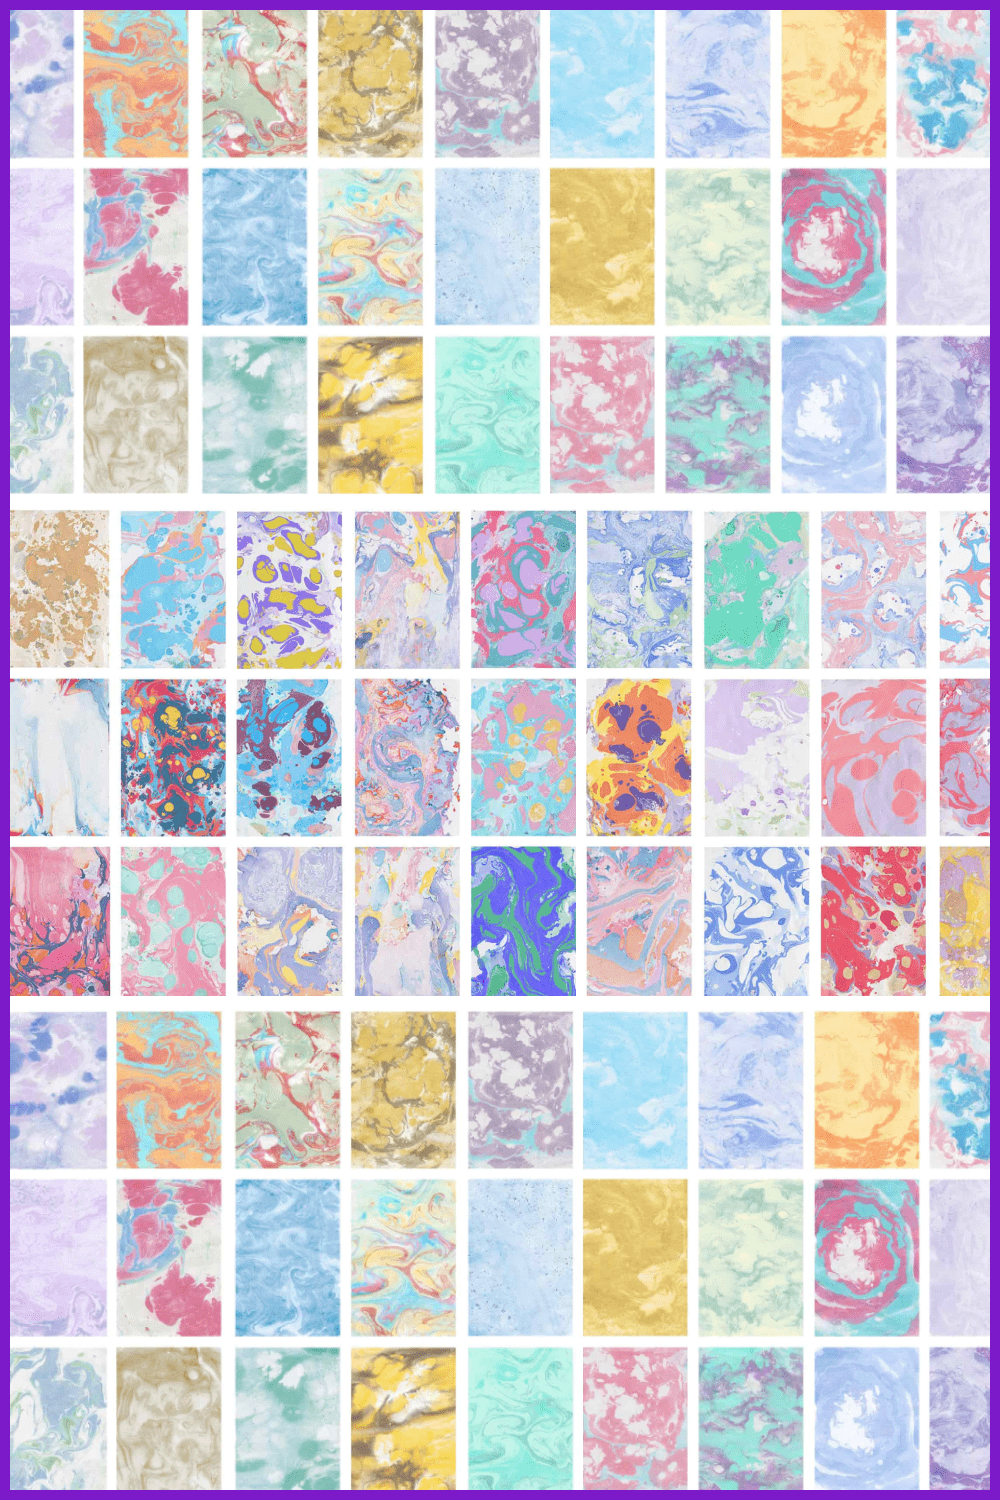 Cute Marble Backgrounds & Textures Bundle: 110 Items – $12 ONLY.